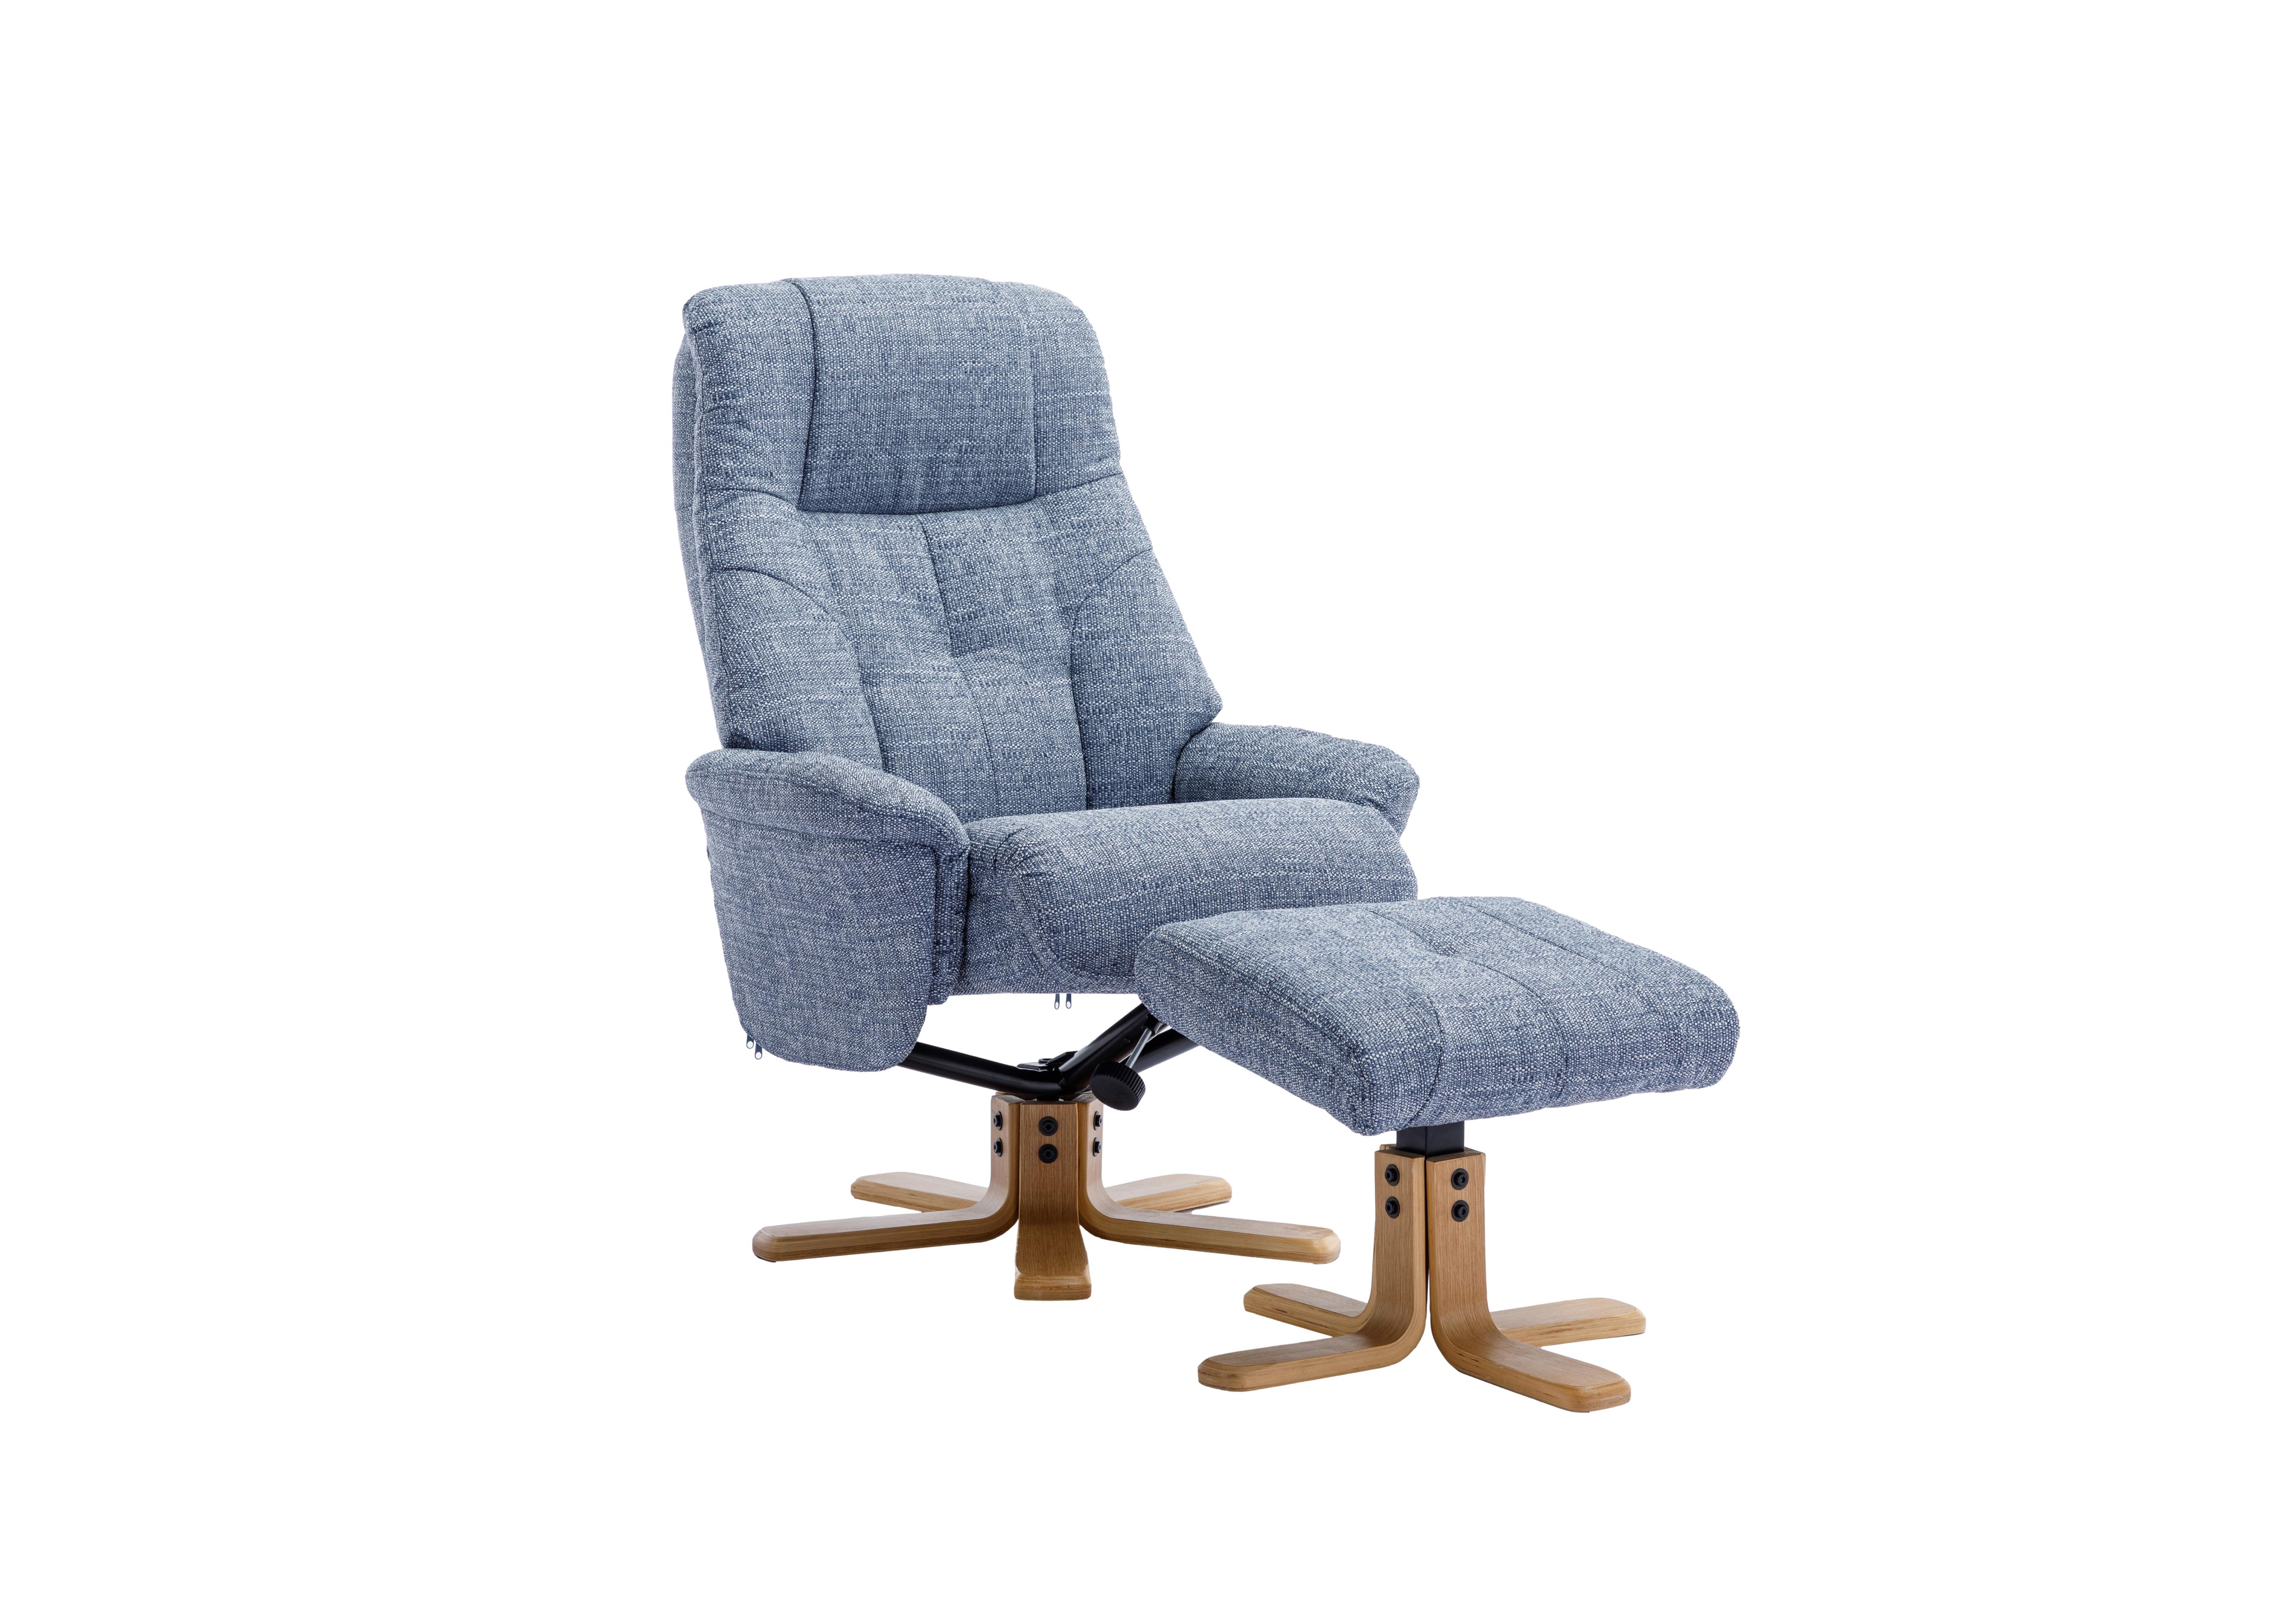 Muscat Fabric Swivel Recliner Chair with Footstool in Lisbon Marine on Furniture Village